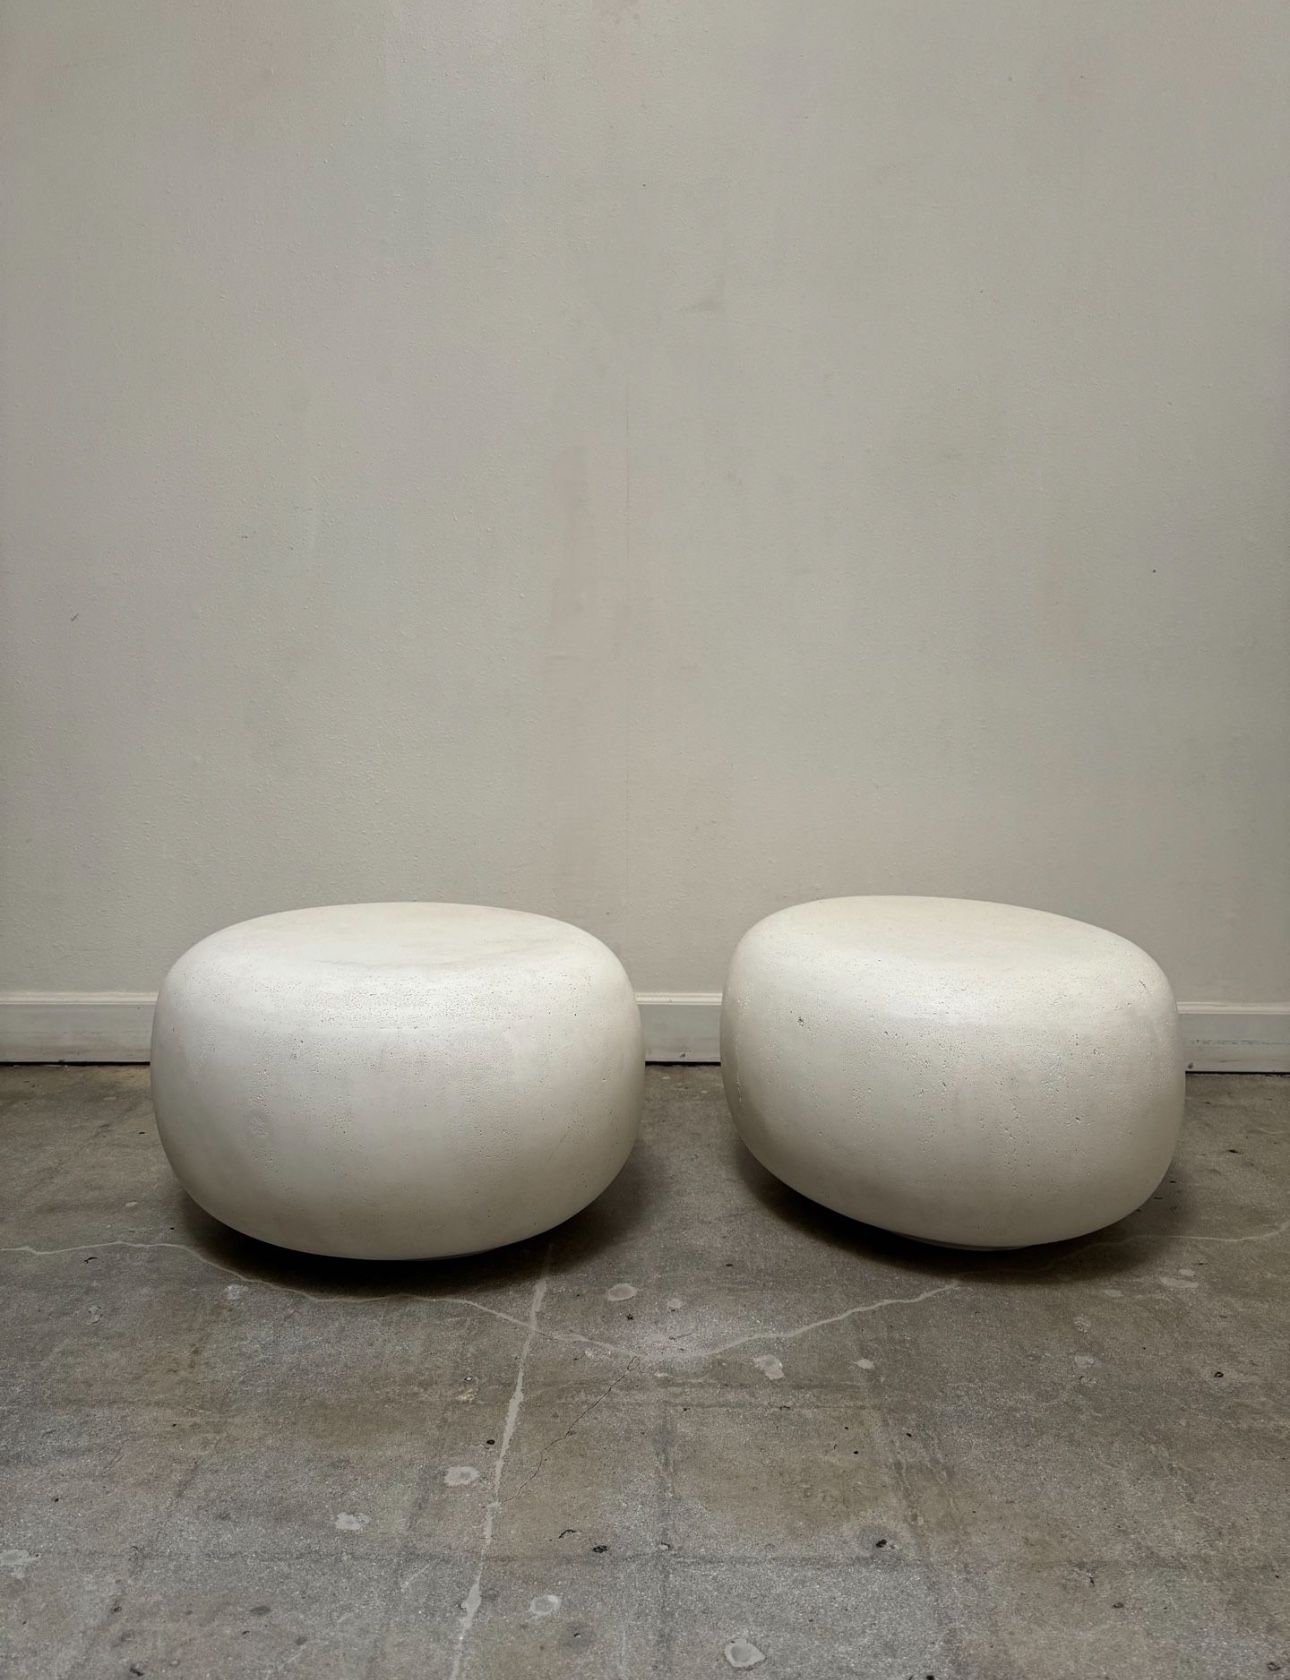 Crate & Barrel Pebble White Indoor/Outdoor Concrete Side Tables by Leanne Ford